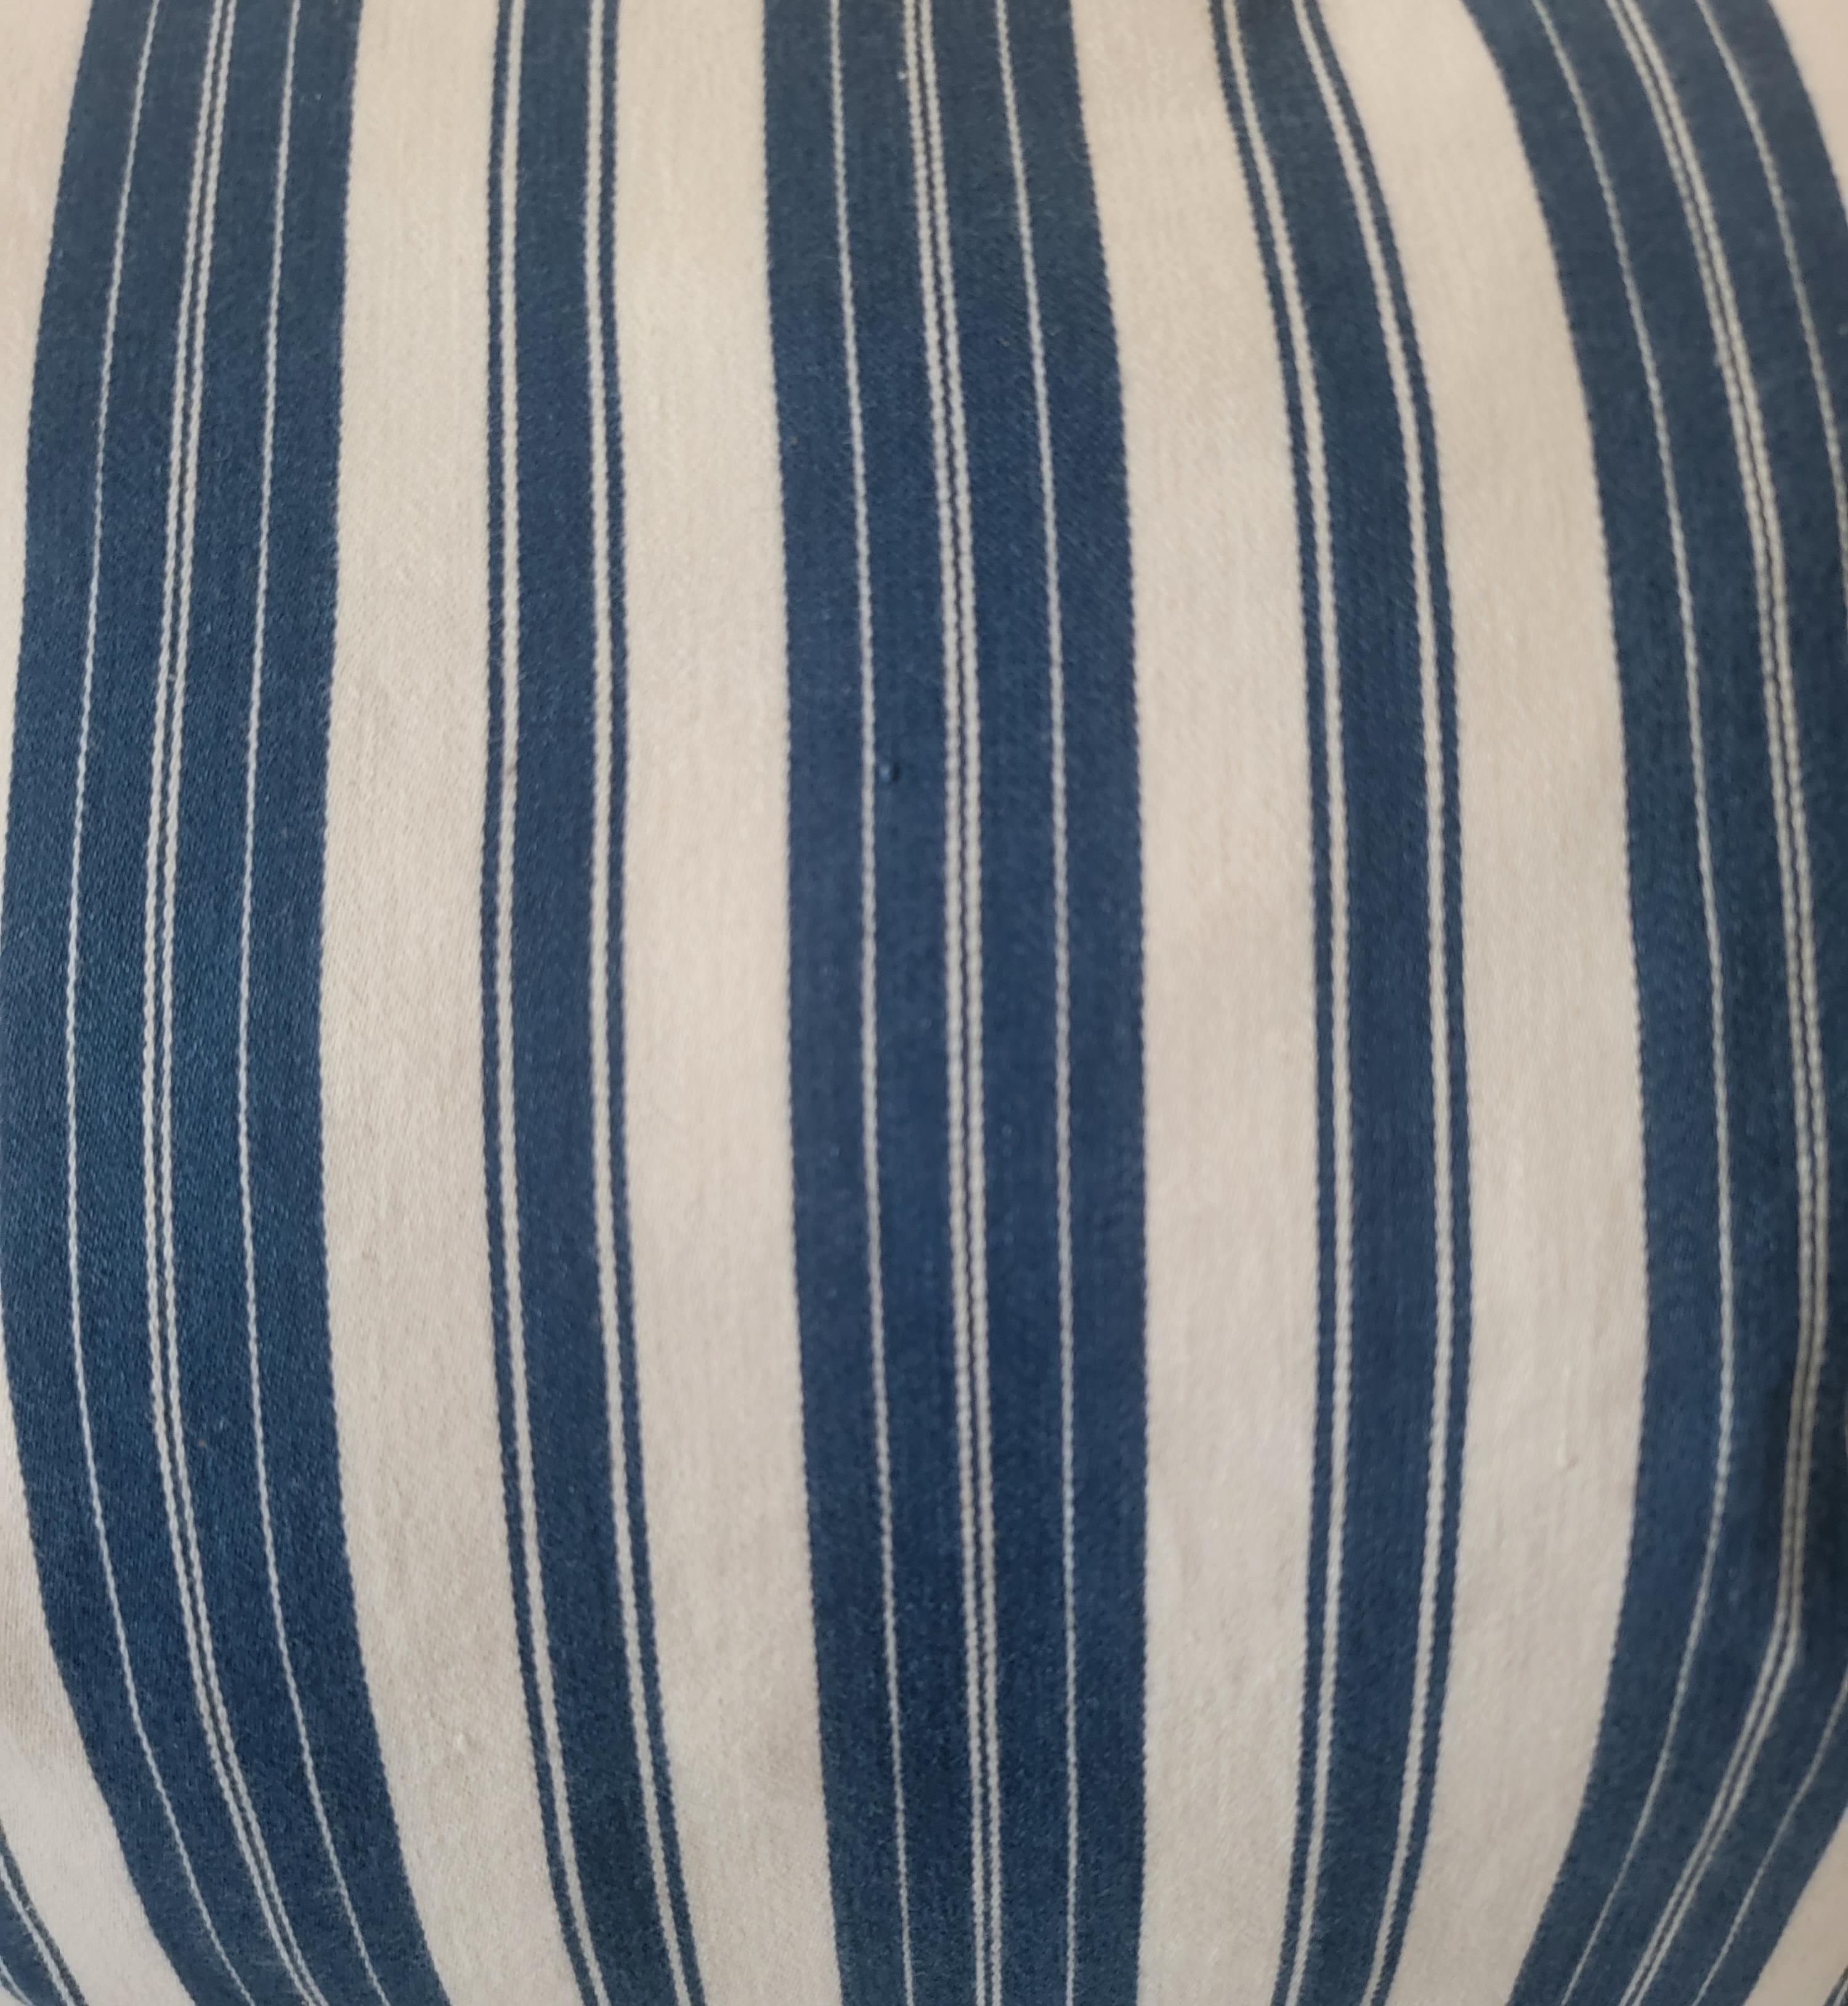 Blue and White 19thc Striped ticking pillows with linen backing and downs and feather inserts. The blue stripes are very present in this set. Strong blue color and a thick stripe make it so that the blue stripes over power the white stripes.